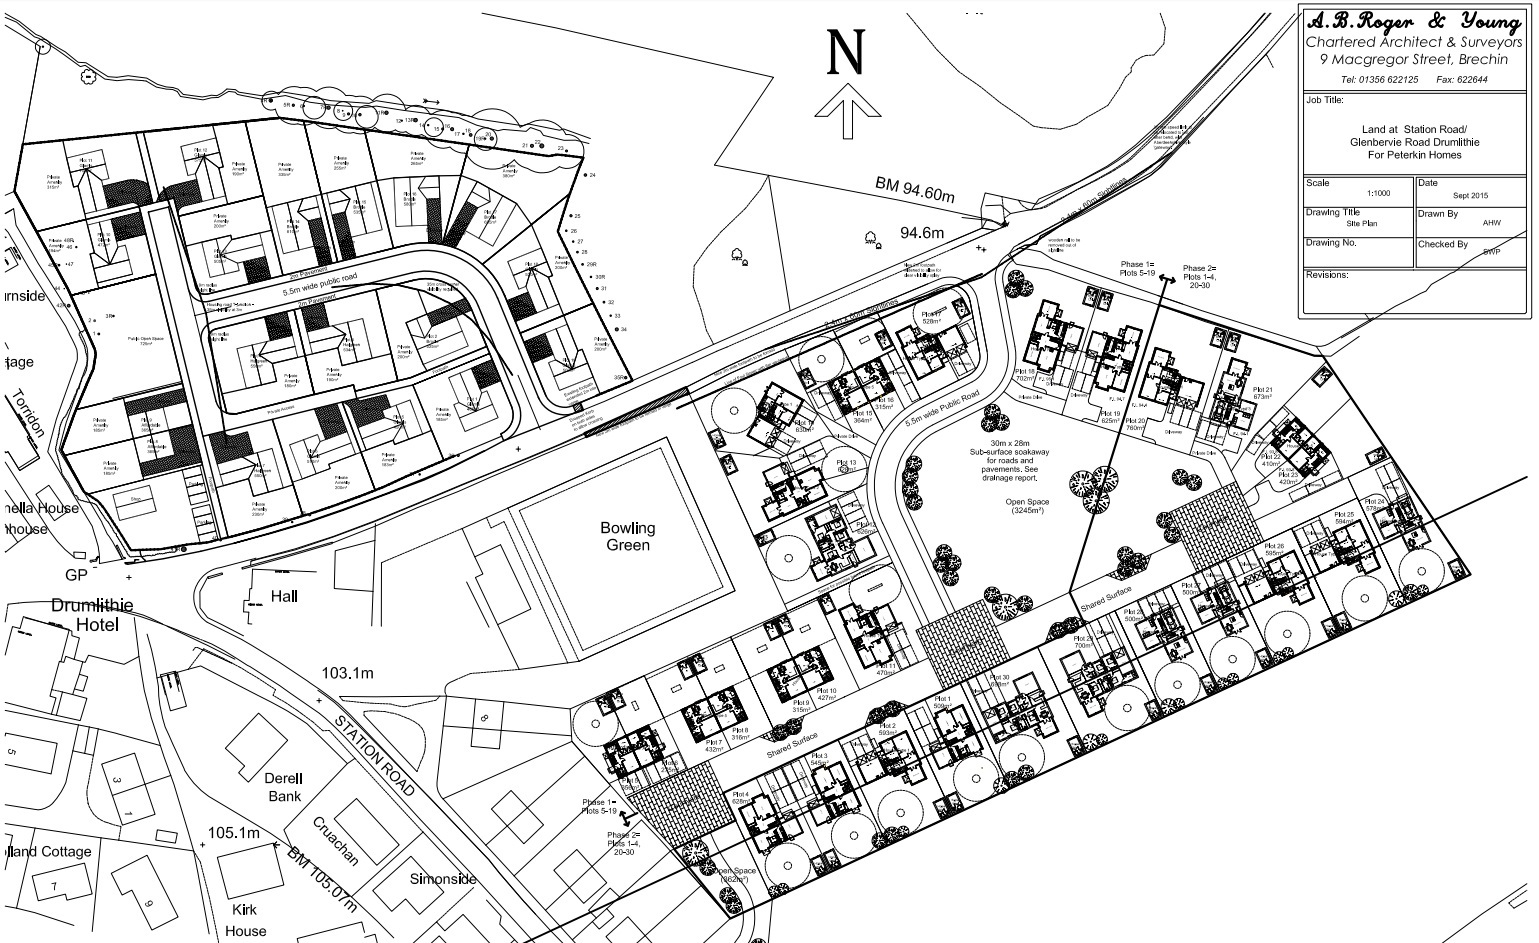 The proposed development to the east and south of the bowling green